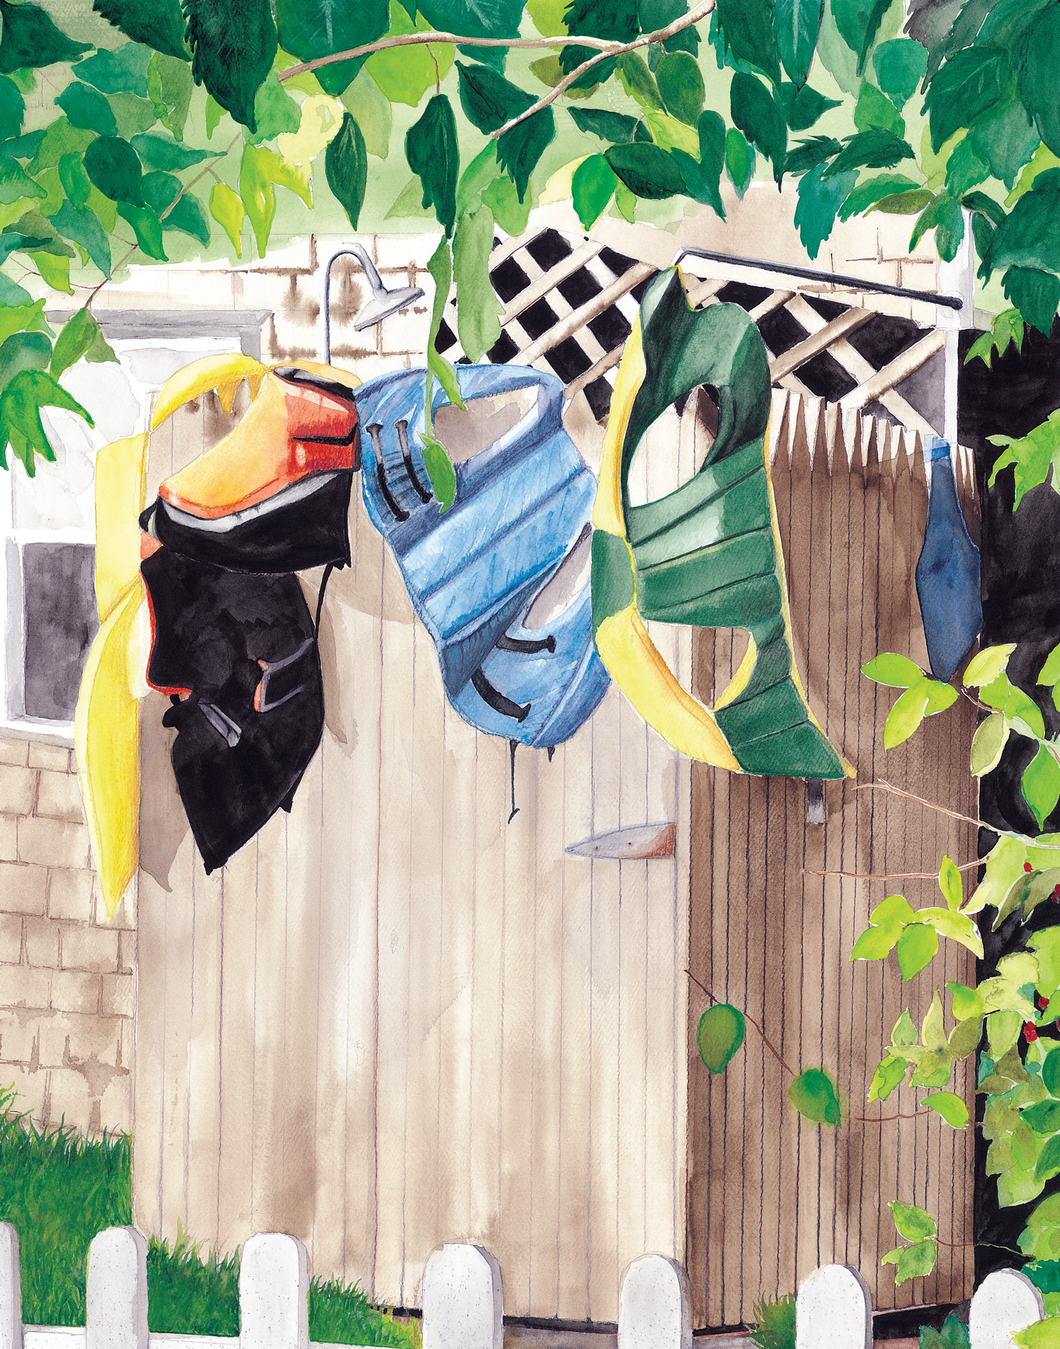 This outdoor shower has the life jackets hanging off the picket fence  enclosure drying .  The jackets are orange , black, yellow, blue and green.